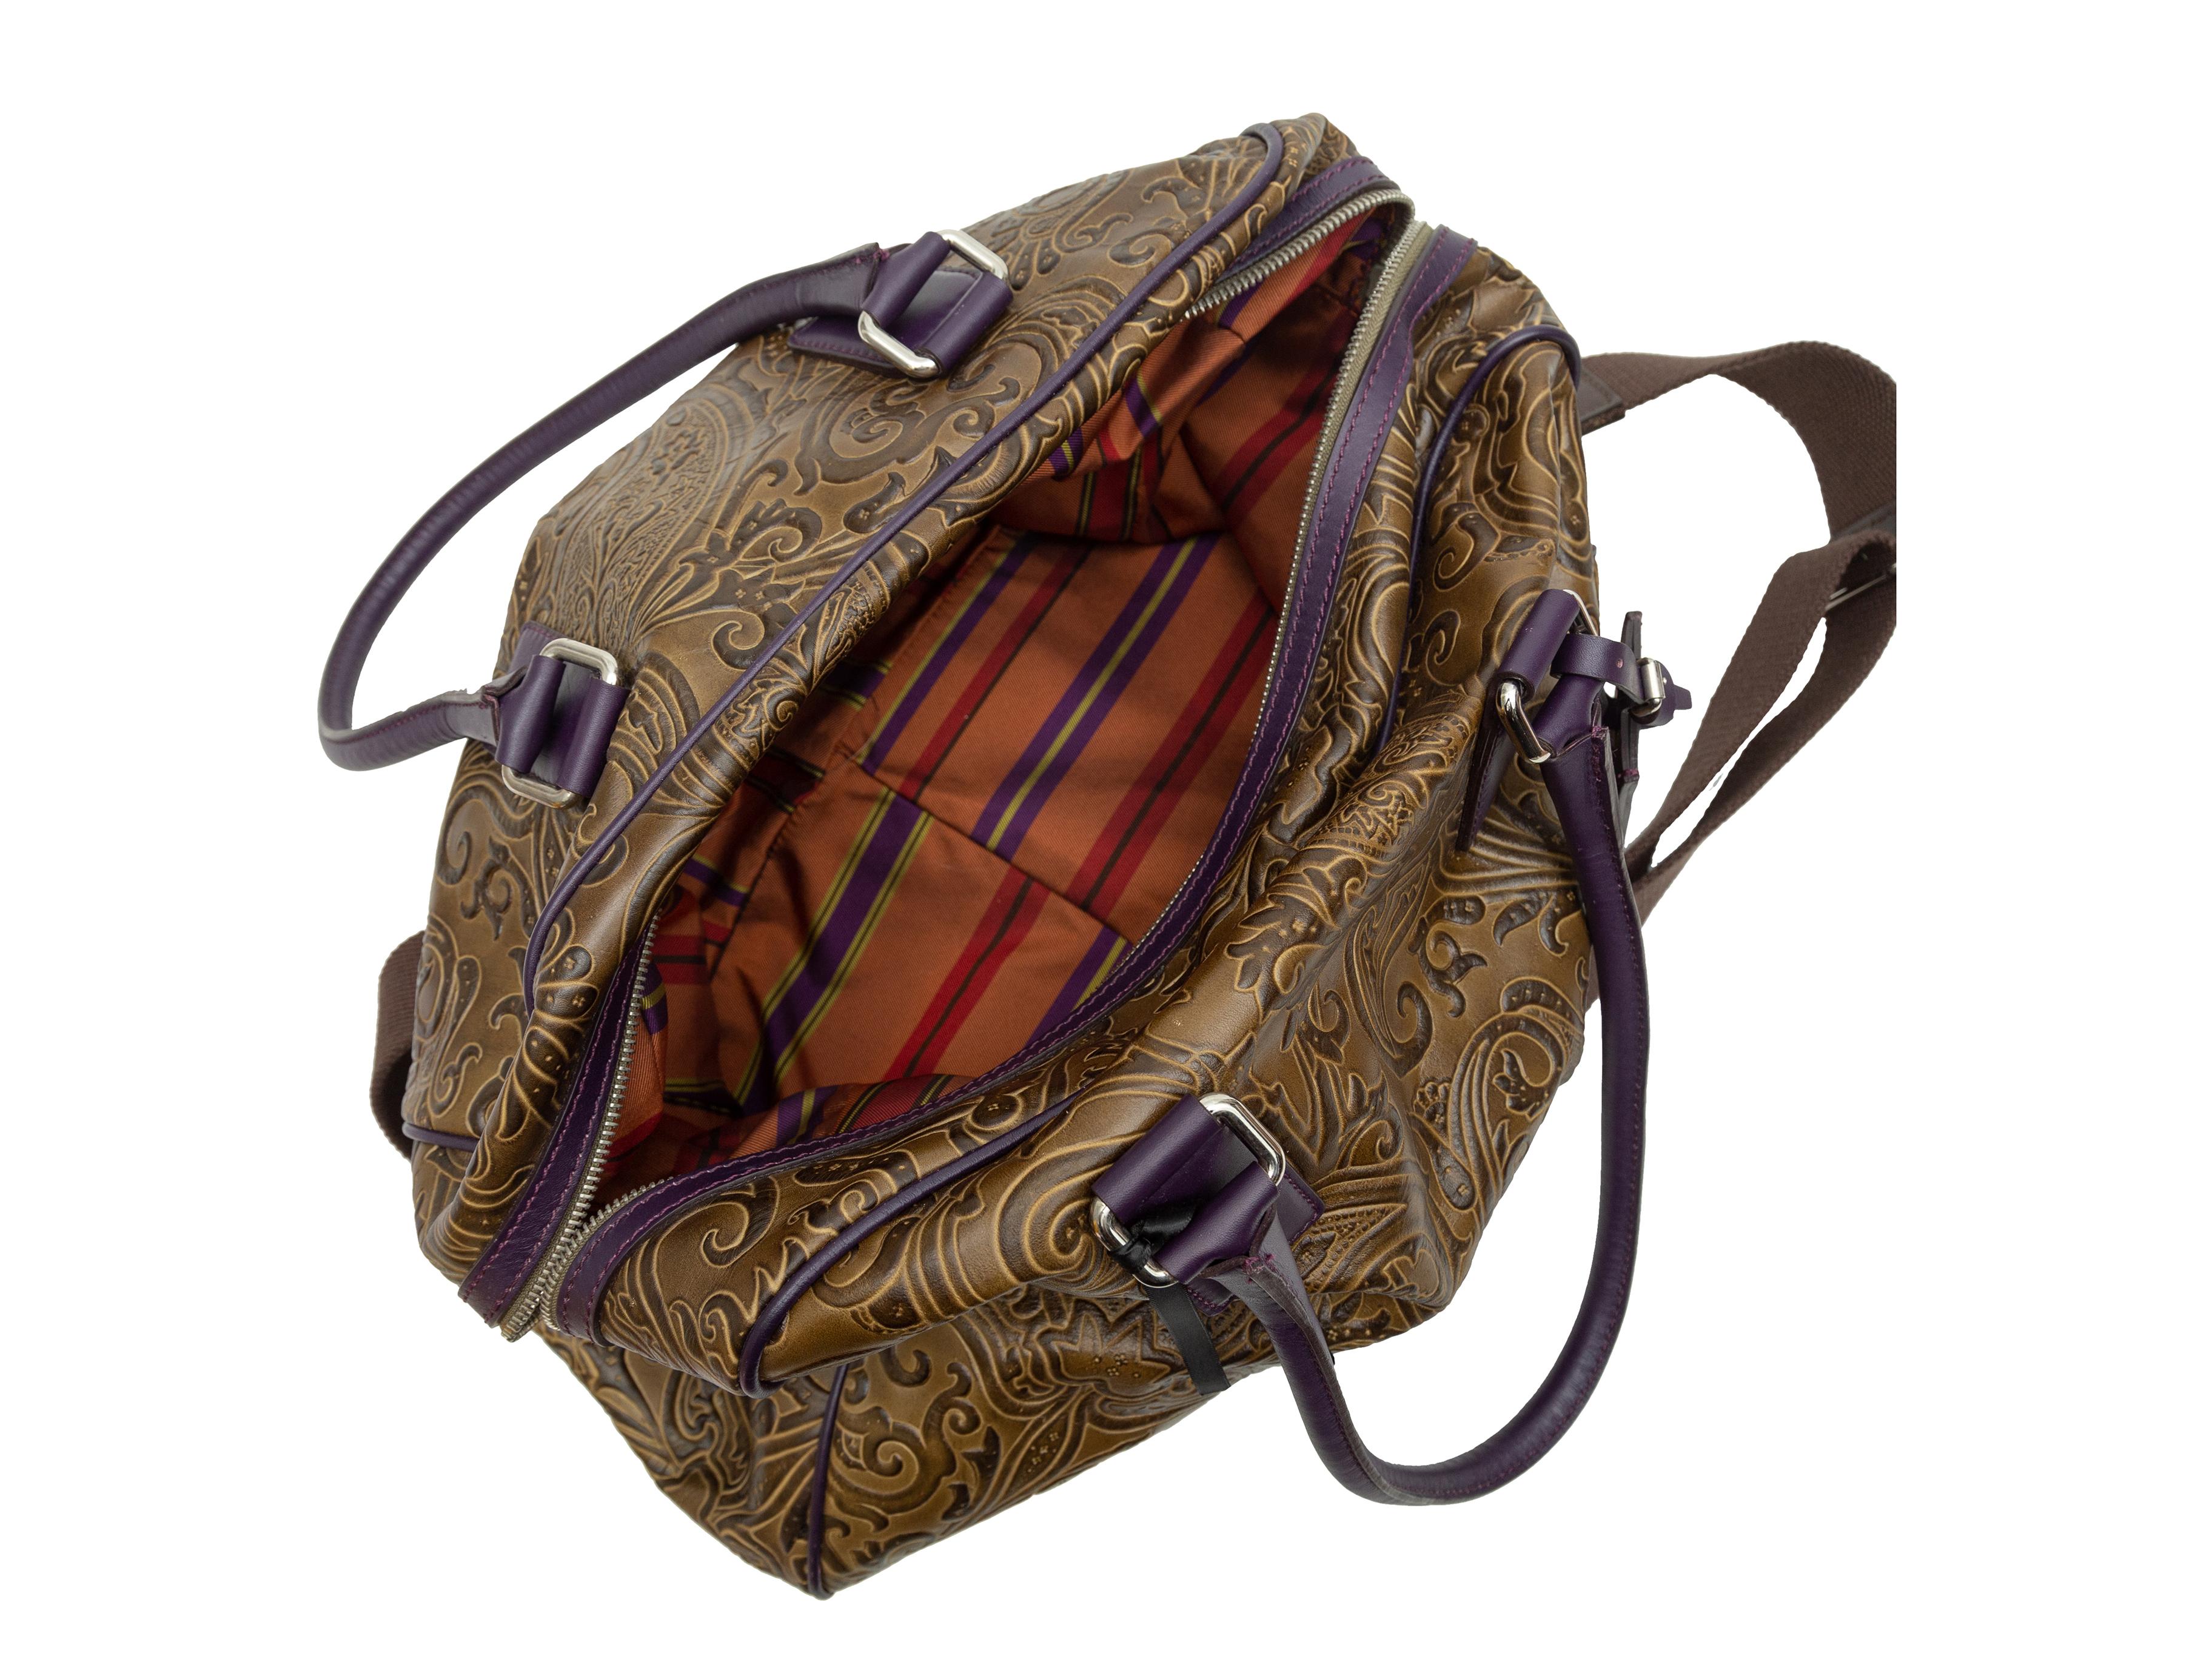 Product details: Olive green and dark purple tooled leather handbag by Etro. Paisley pattern throughout. Dual rolled top handles. Detachable shoulder strap. Zip closure at top. 16